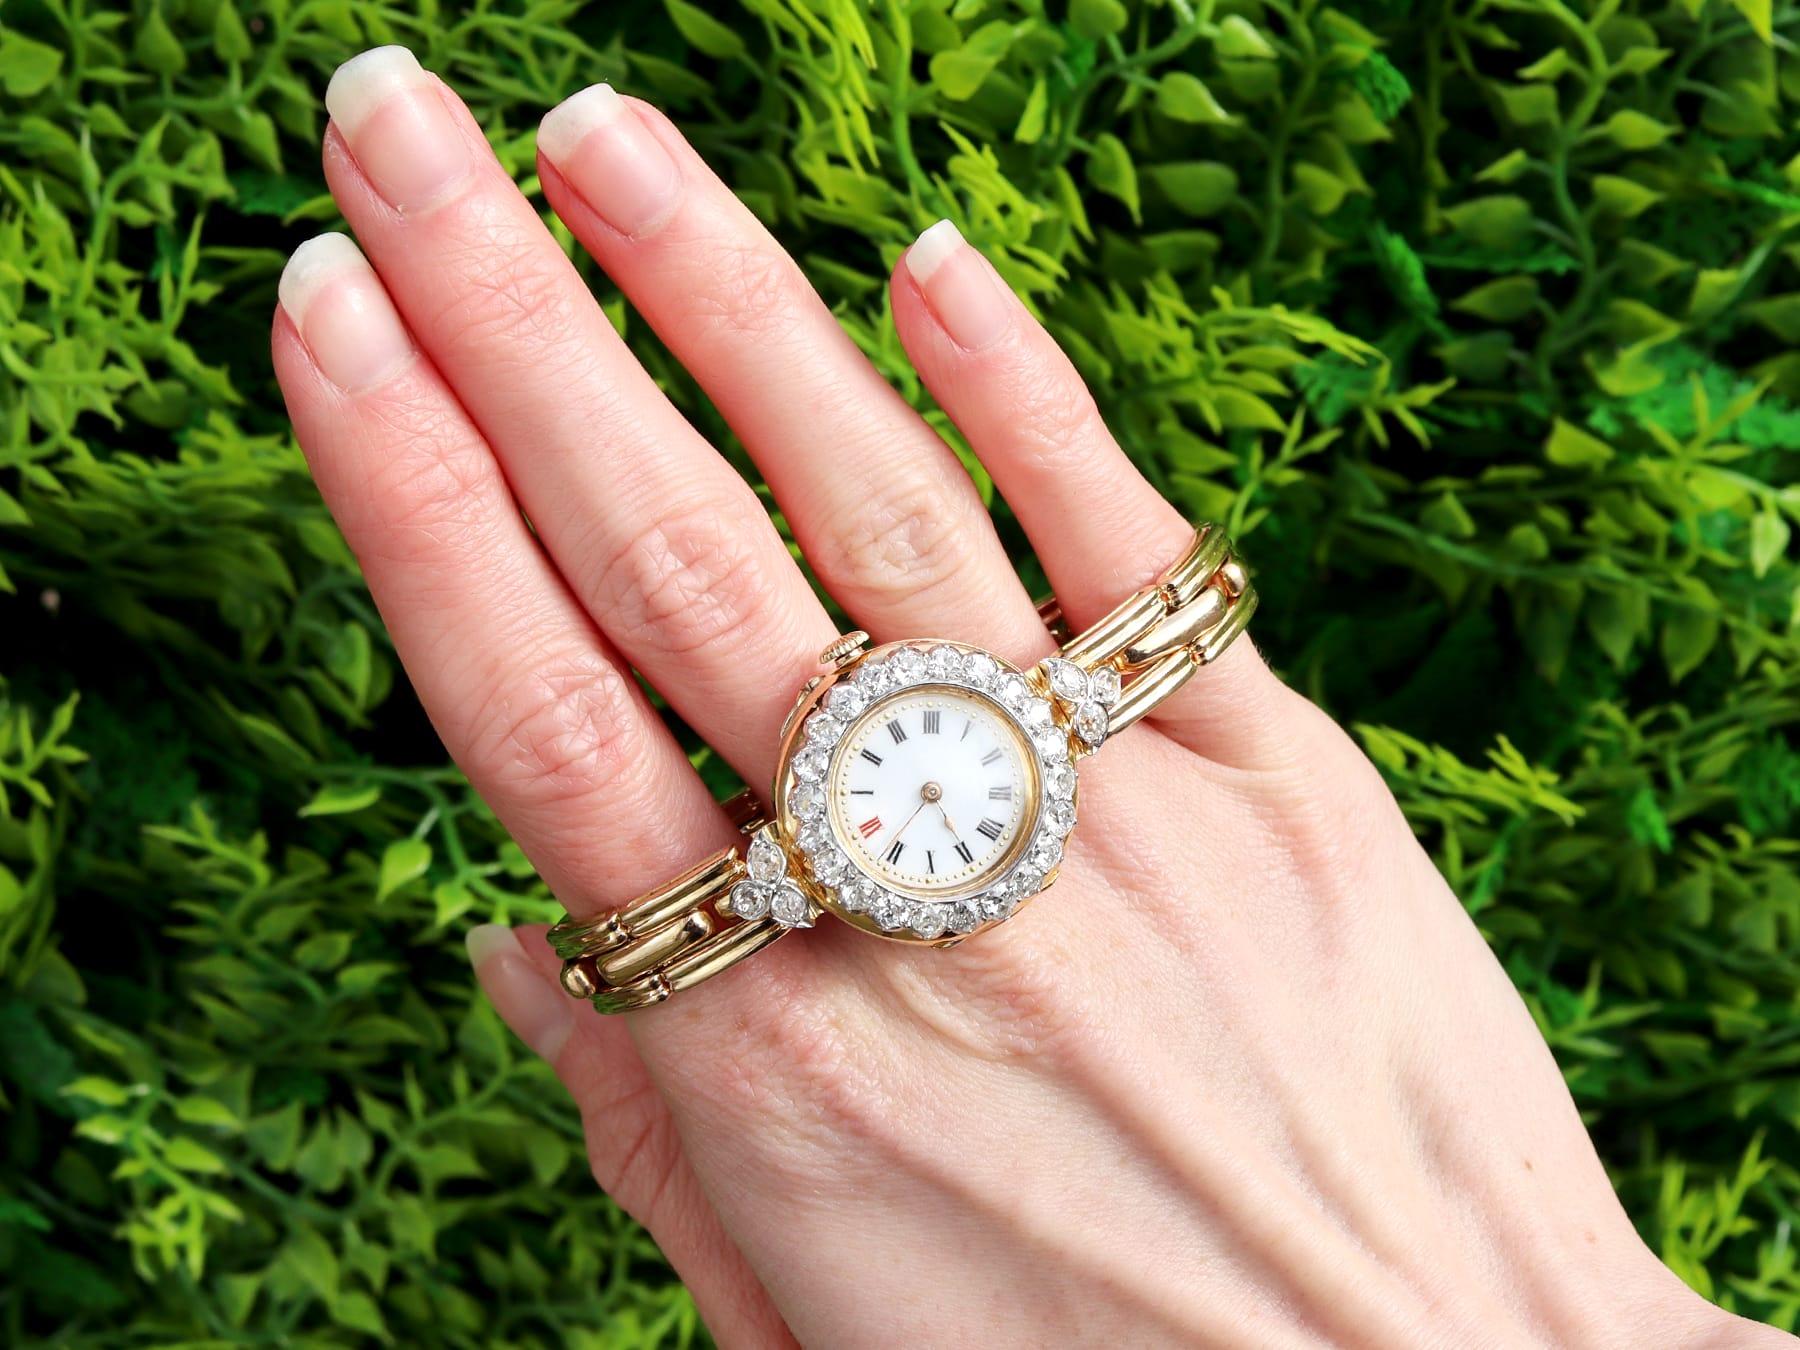 A stunning, fine and impressive antique 2.75 carat diamond and 18k yellow gold, platinum set watch; part of our diverse diamond watch collections.

This stunning antique watch has been crafted in 18k yellow gold with platinum settings.

The plain